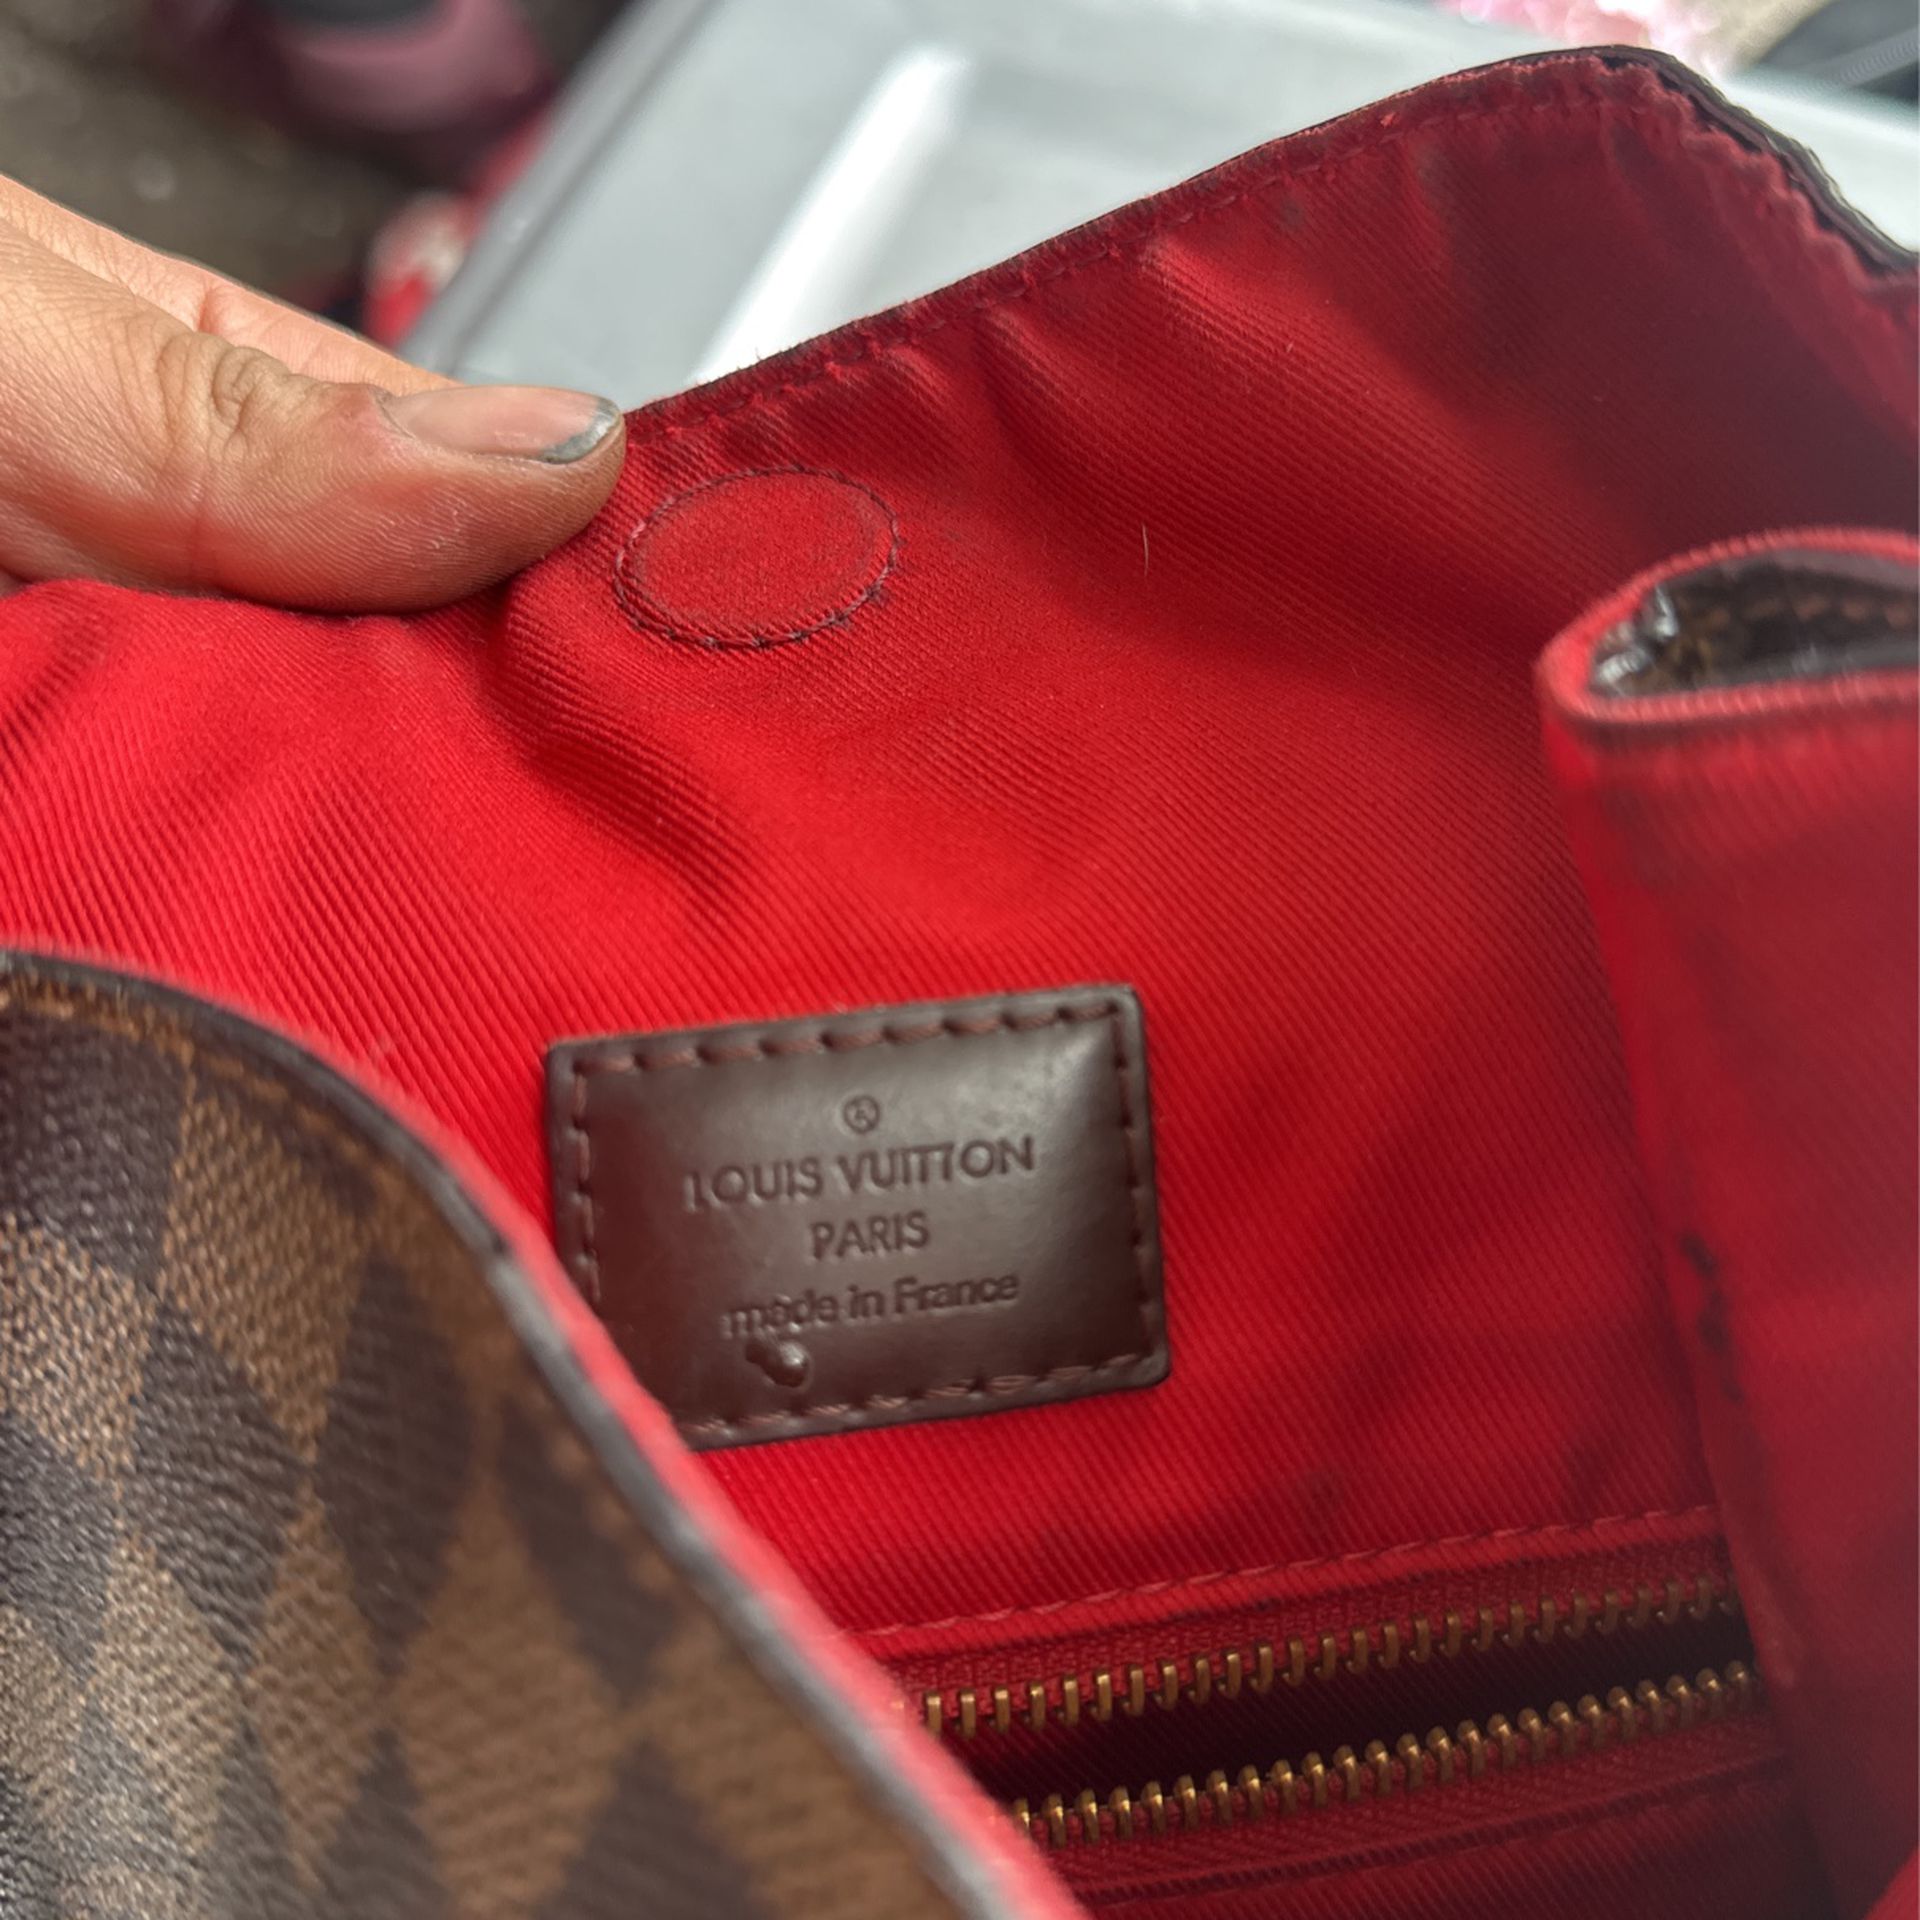 LV Bag Graceful Pm for Sale in San Jose, CA - OfferUp